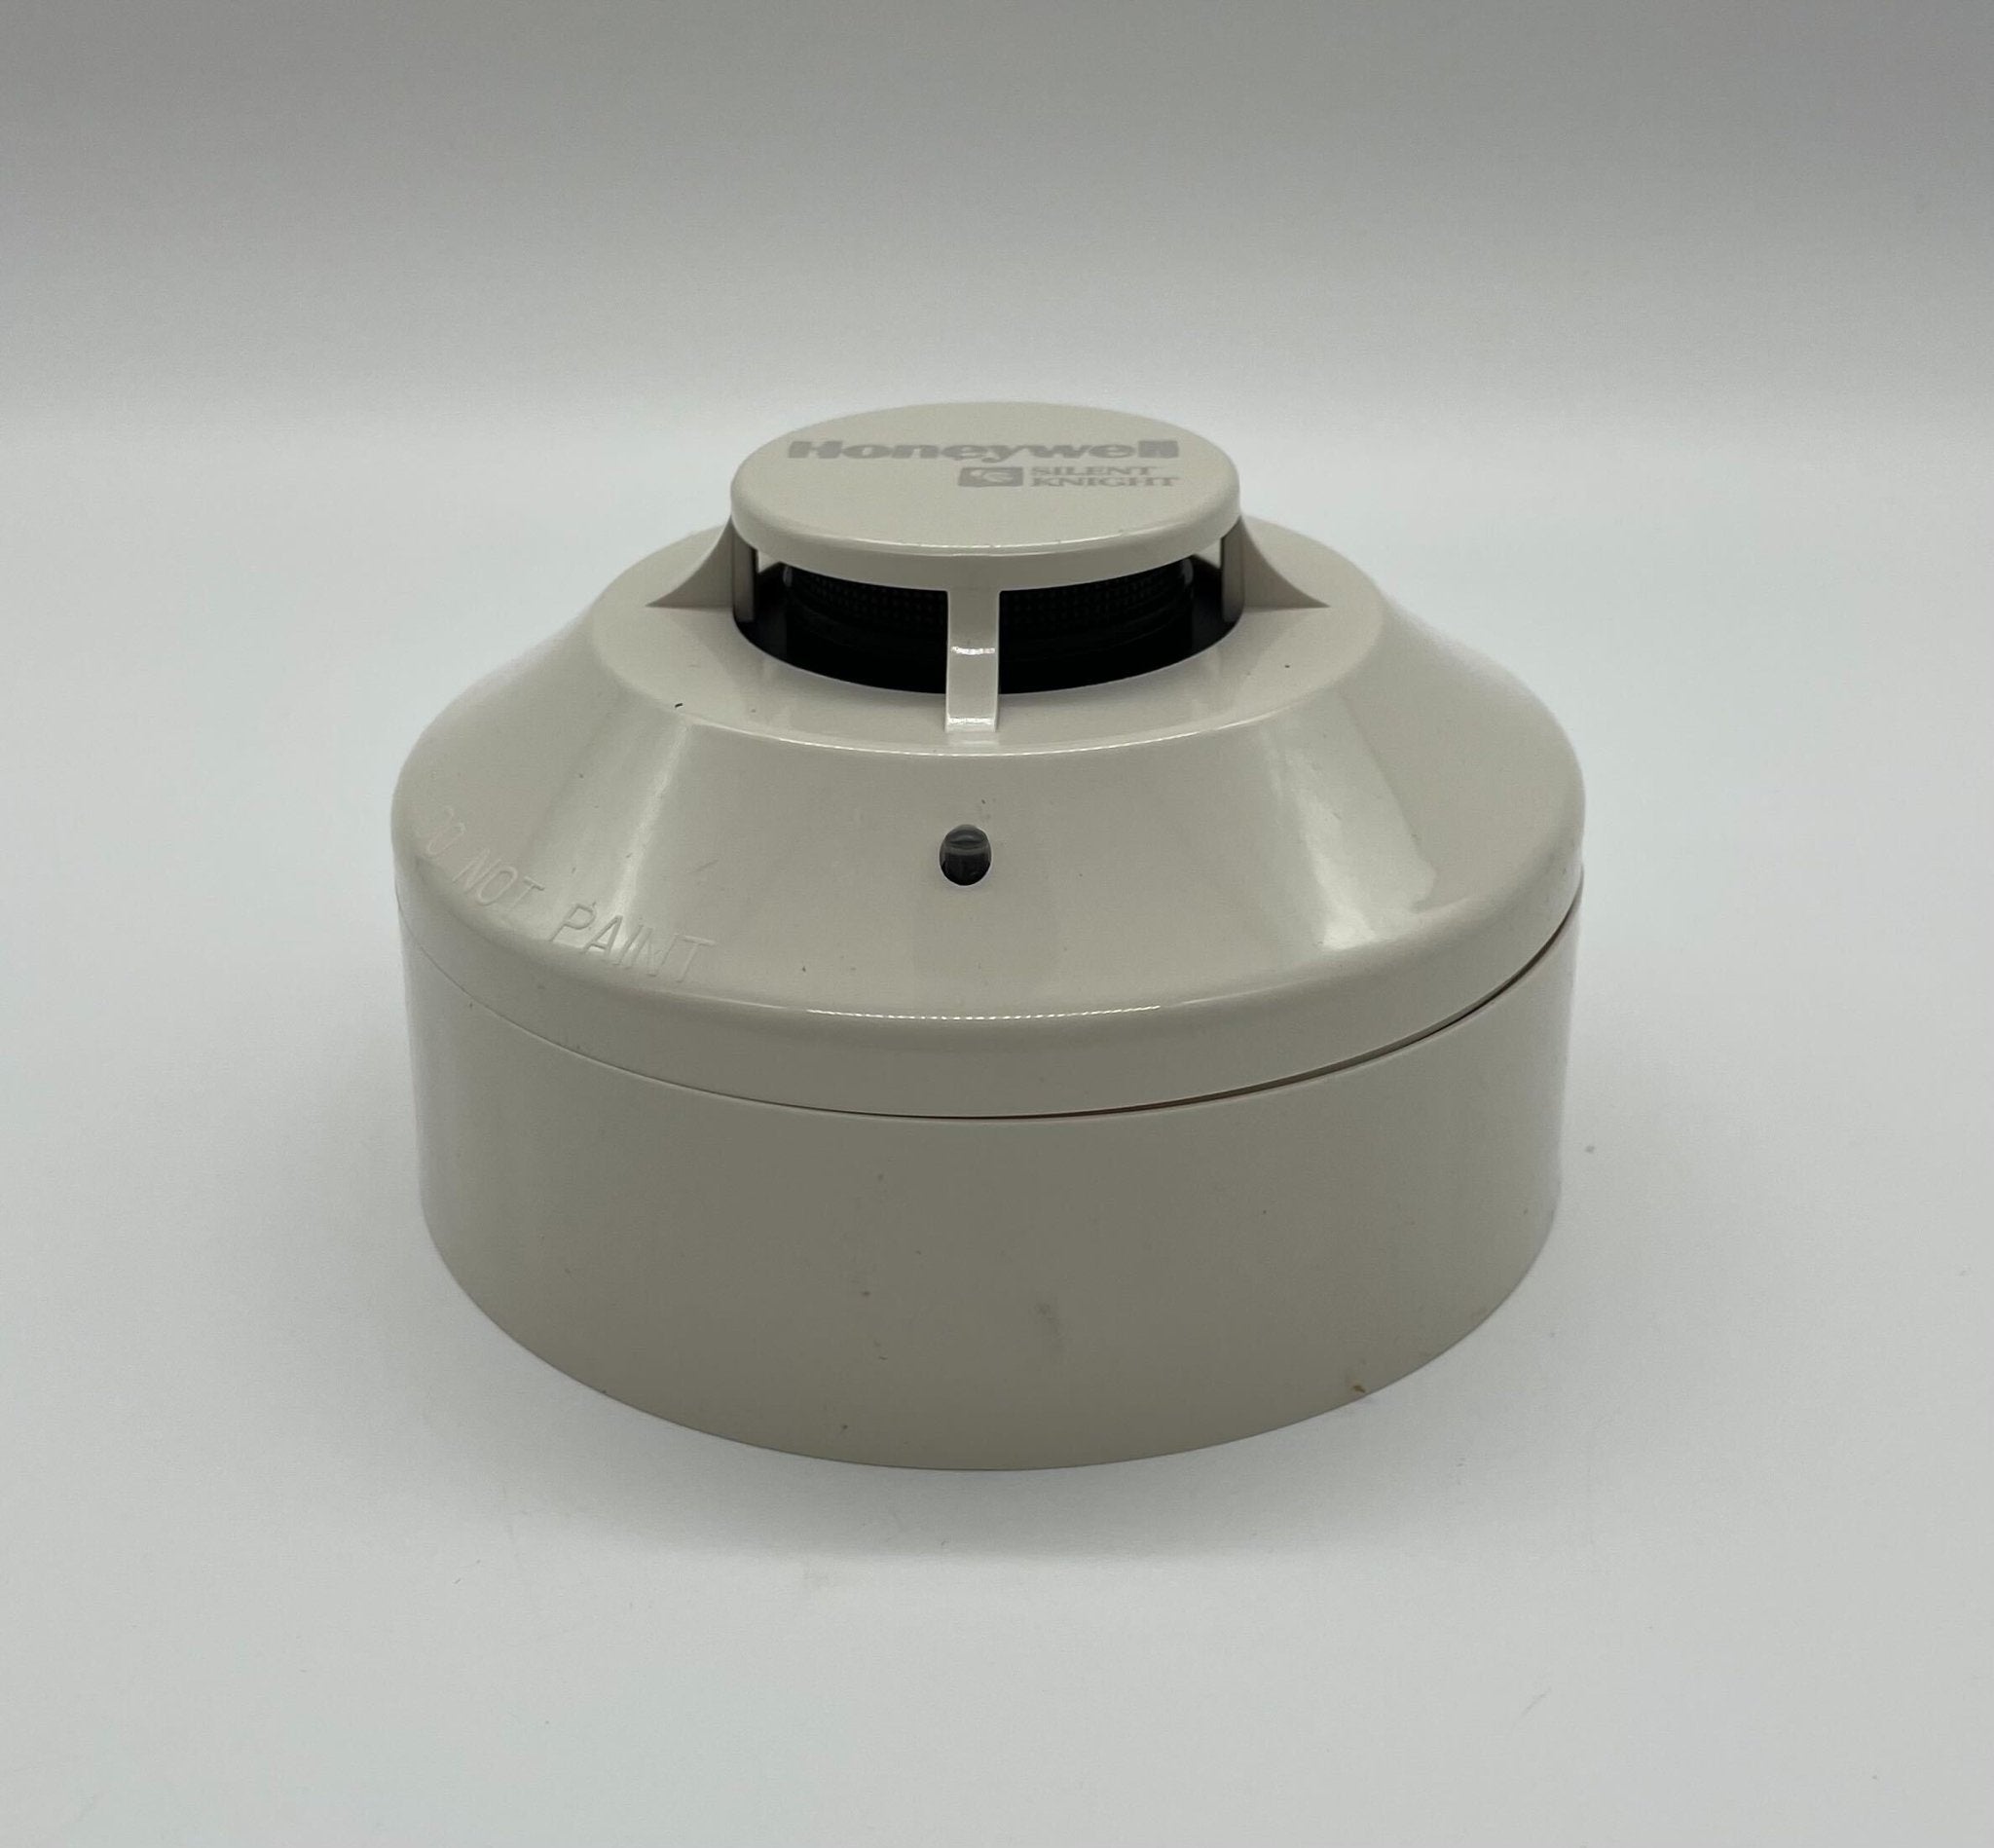 Silent Knight WSK-PHOTO - The Fire Alarm Supplier